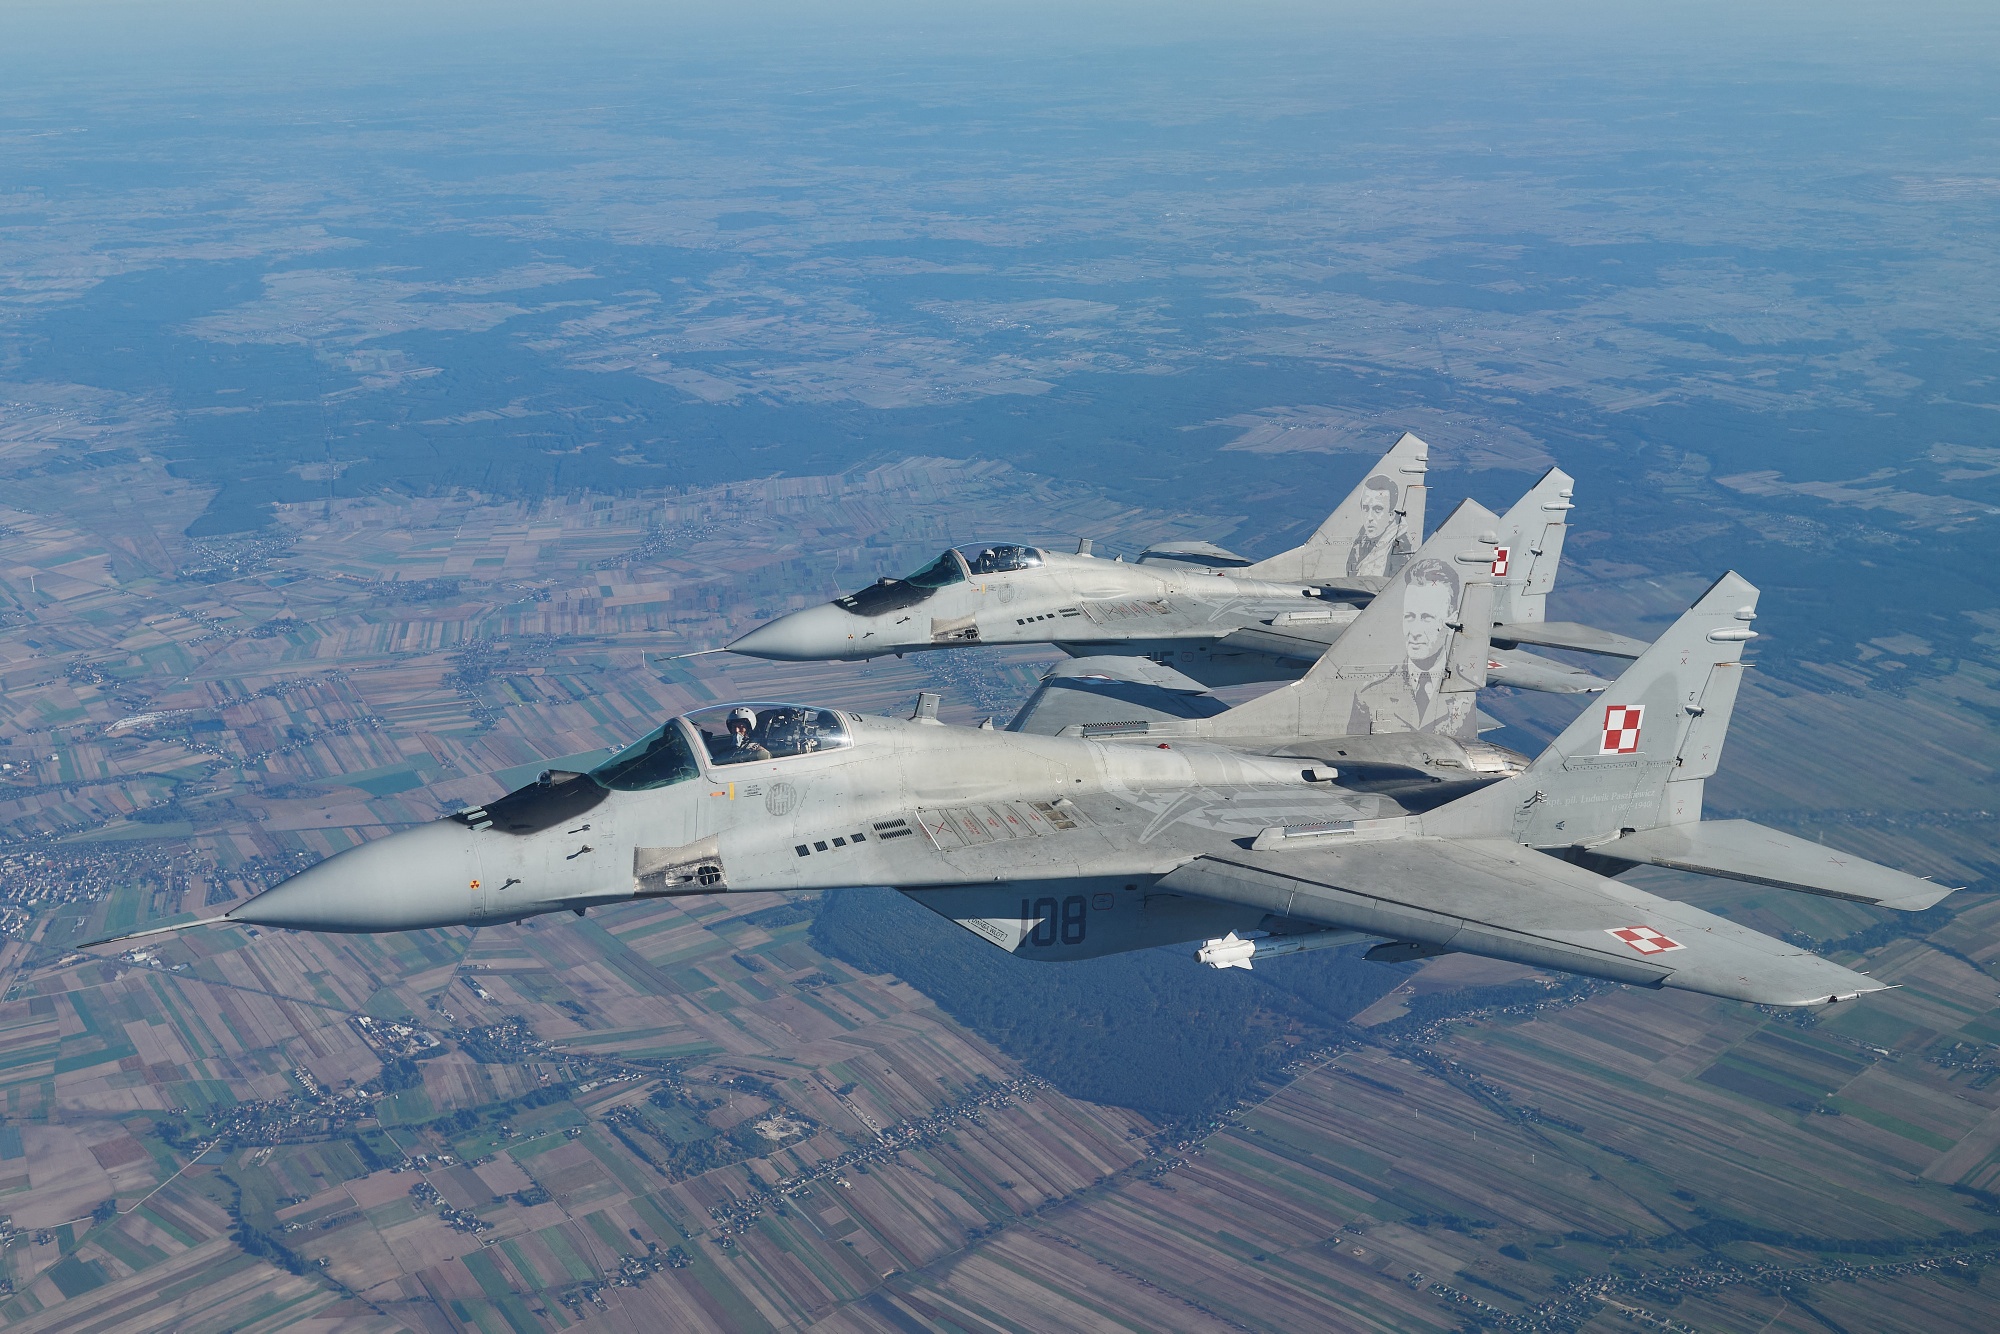 Poland Asks German Approval For Ukraine's Purchase Of Obsolete Fighter Jets